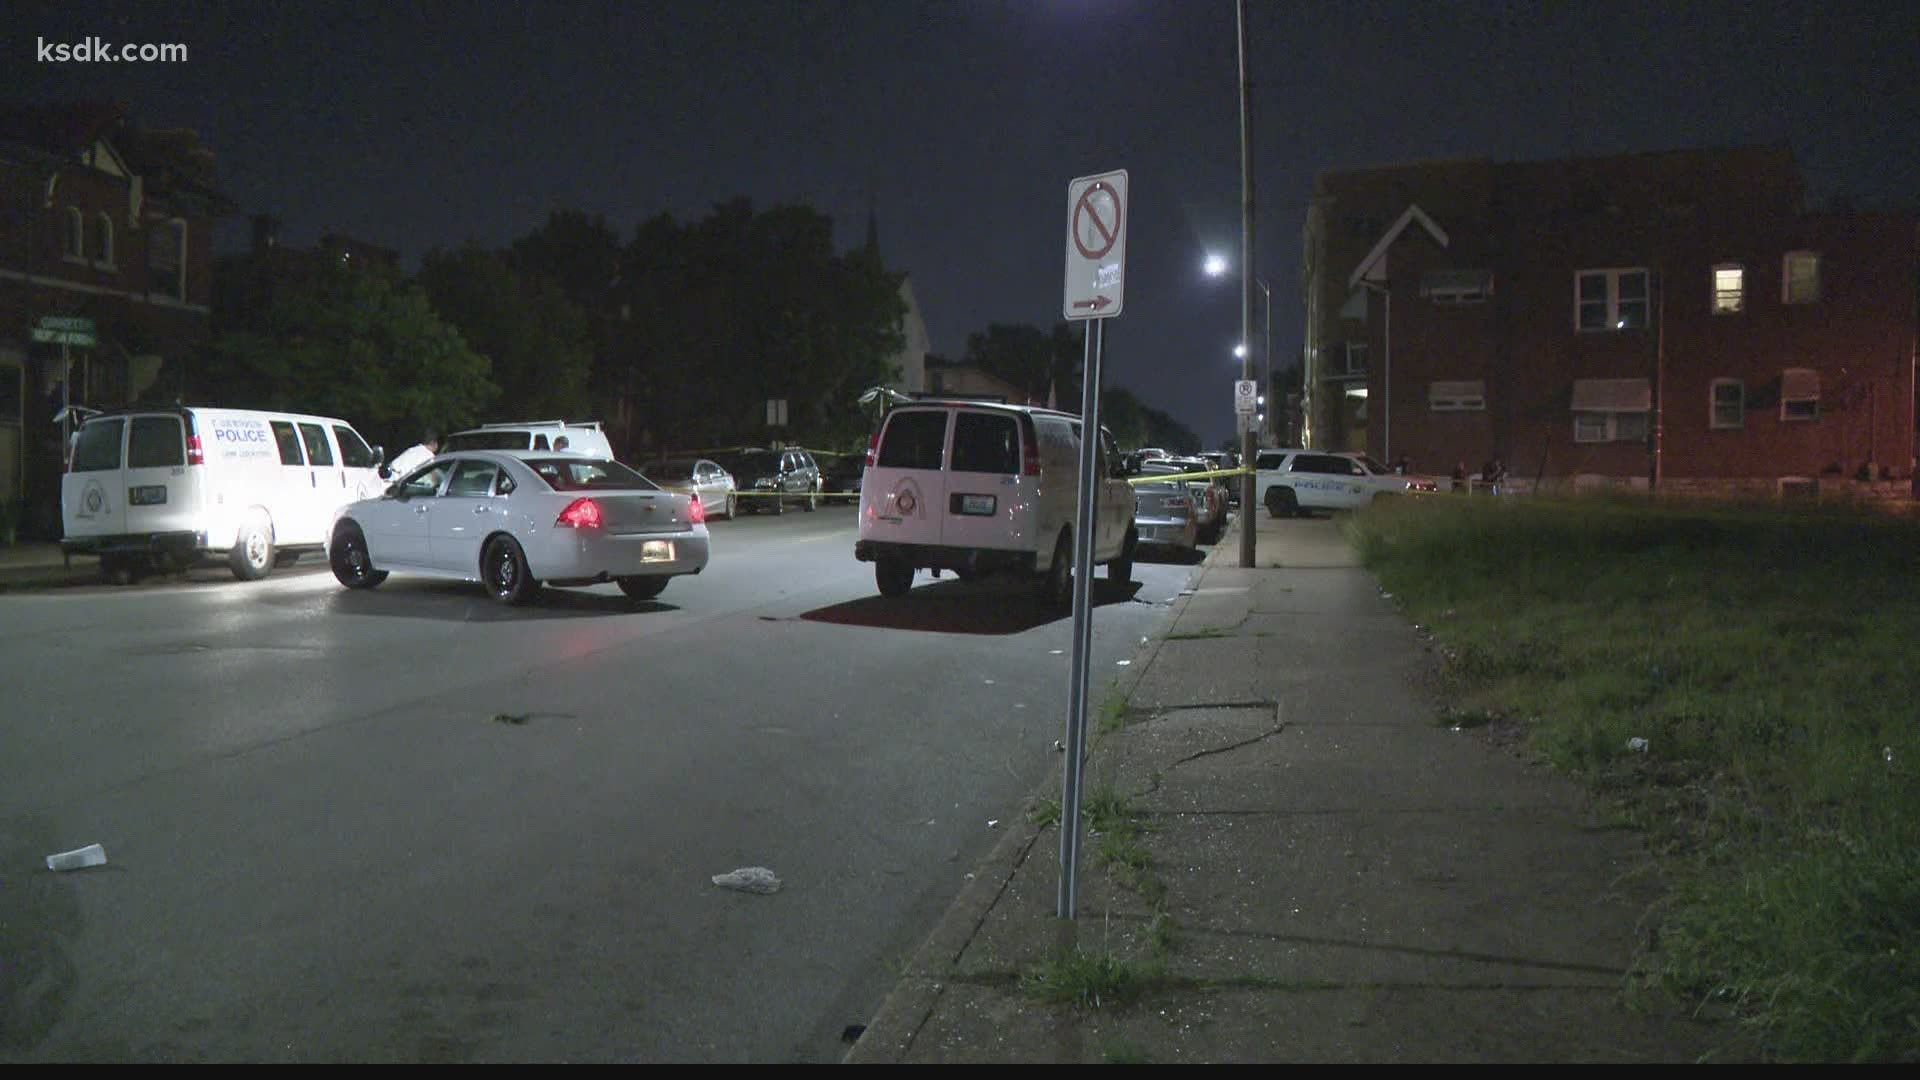 Police are investigating several fatal shootings in the city.